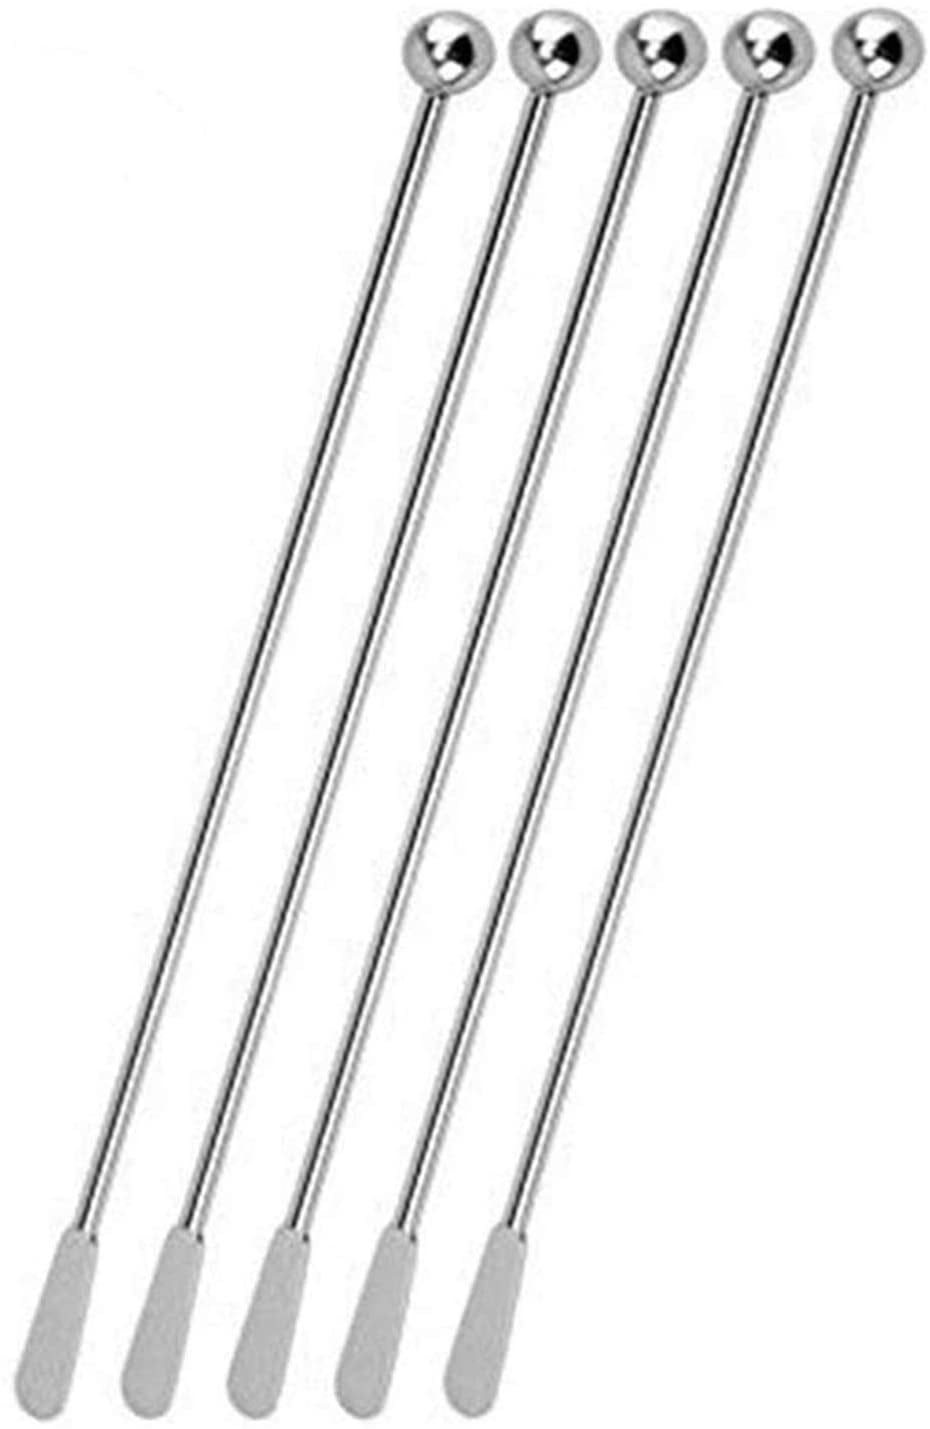 Stainless Steel Coffee Beverage Stirrers Stir Cocktail Drink Swizzle Stick with Small Rectangular Paddles（10Pcs Colored Straight Rod） 